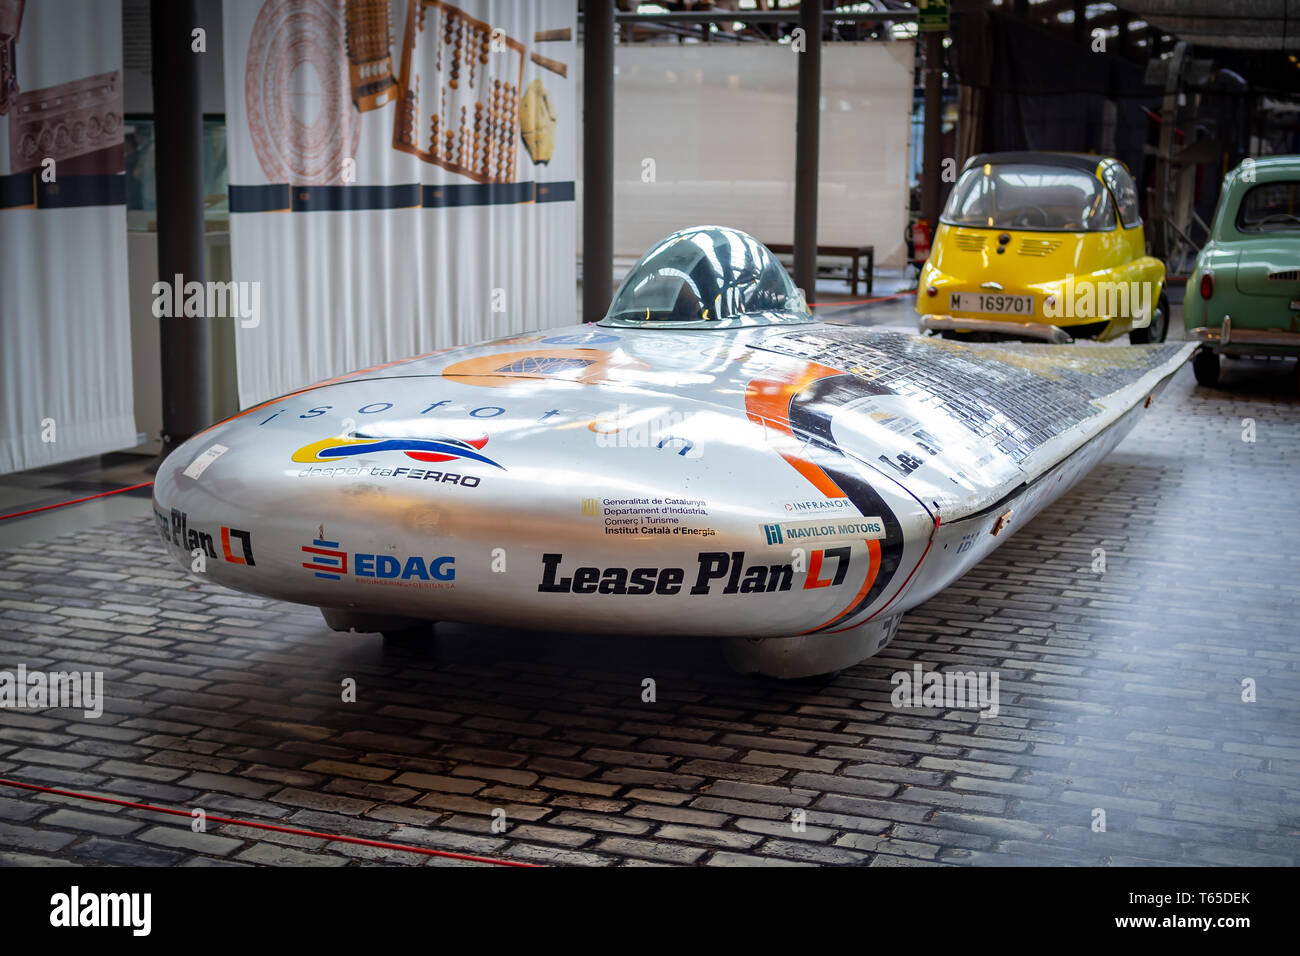 TERRASSA, SPAIN-MARCH 19, 2019: 1998 Despertaferro solar-powered car in the National Museum of Science and Technology of Catalonia Stock Photo